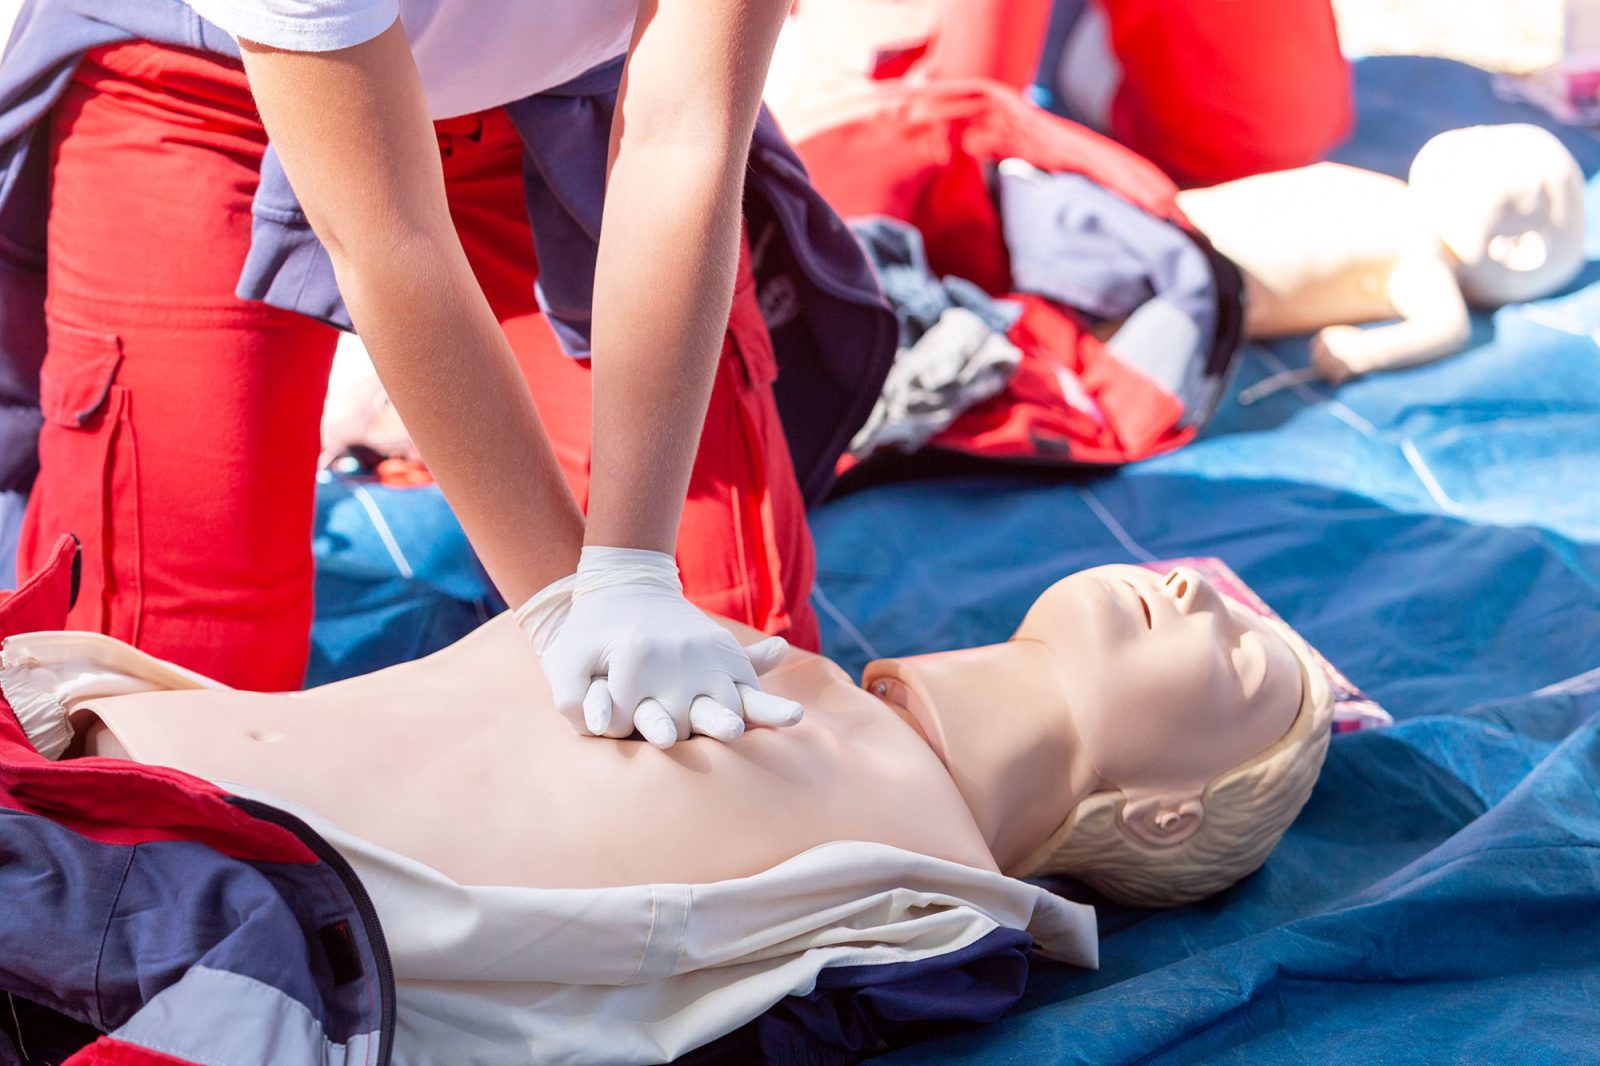 First aid and Cardiopulmonary resuscitation - CPR class